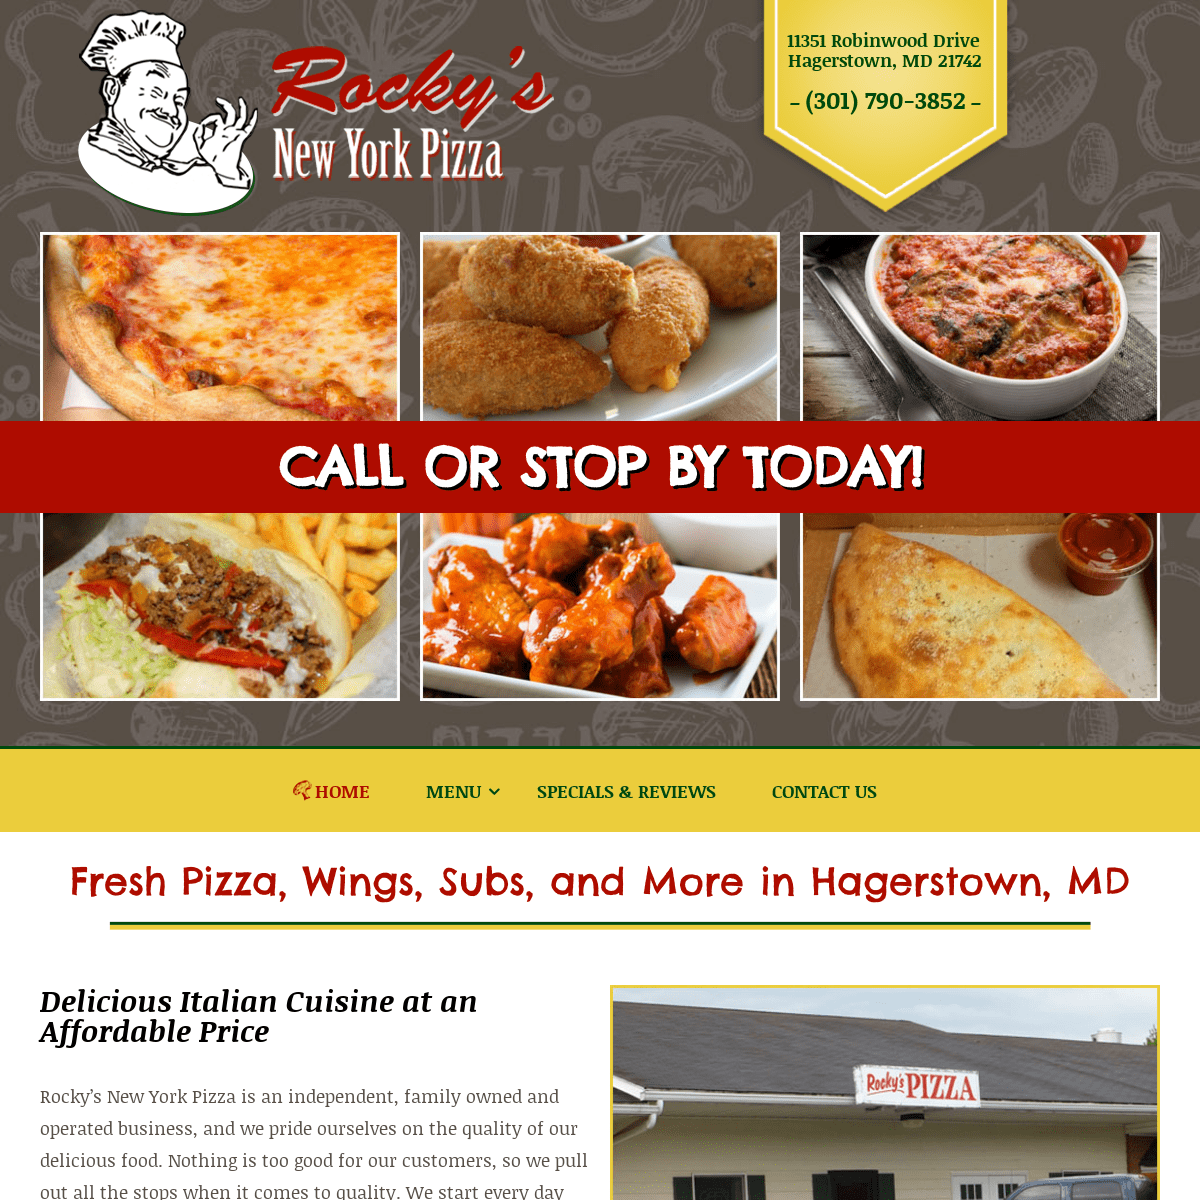 Pizza, pasta, subs, salads, & wings - Hagerstown, MD | Rocky’s New York Pizza